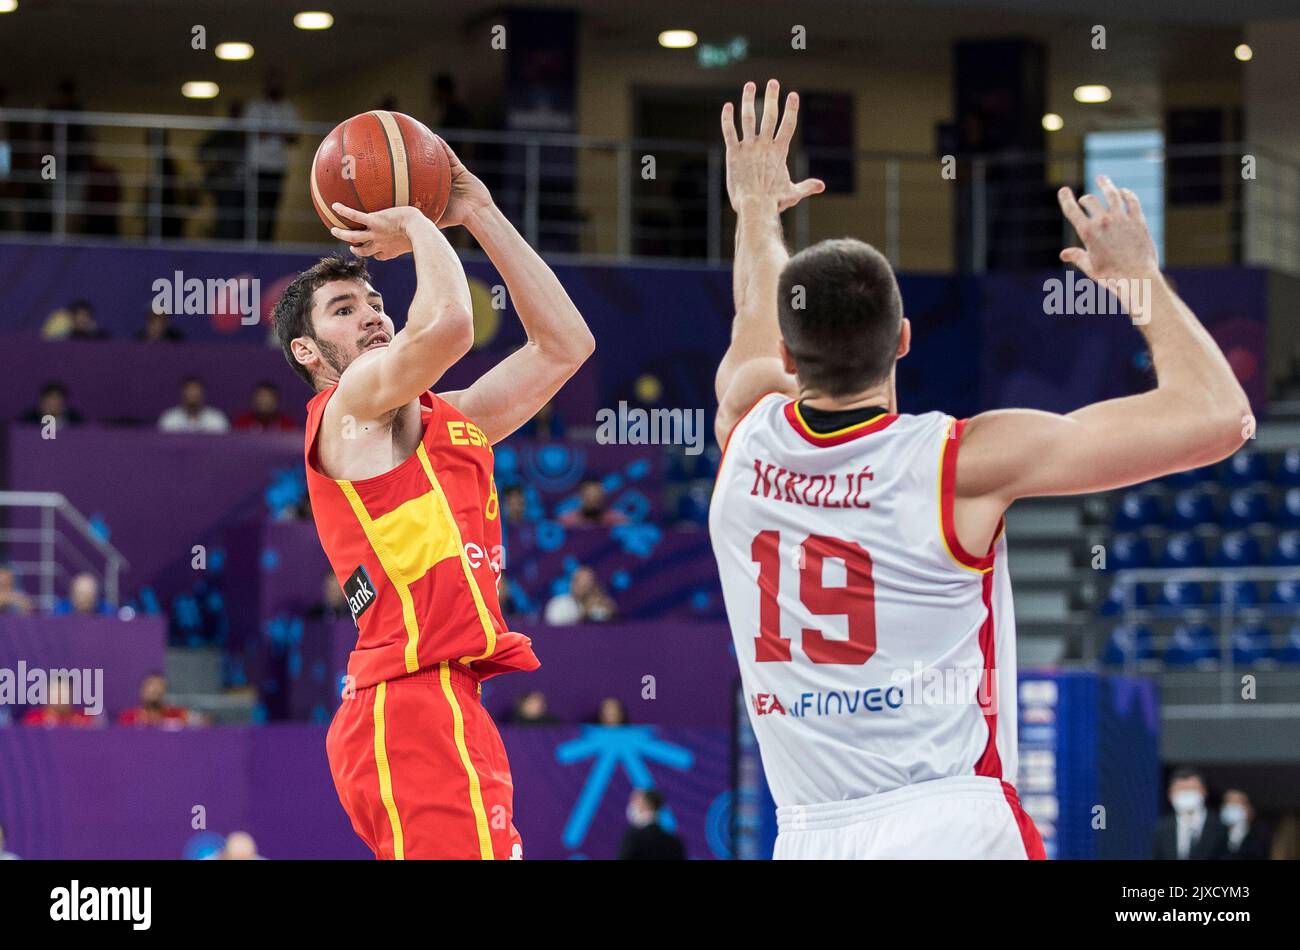 Tbilisi, Georgia, 6th September 2022. Dario Brizuela of Spain shoots for three points during the FIBA EuroBasket 2022 group A match between Montenegro and Spain at Tbilisi Arena in Tbilisi, Georgia. September 6, 2022. Credit: Nikola Krstic/Alamy Stock Photo